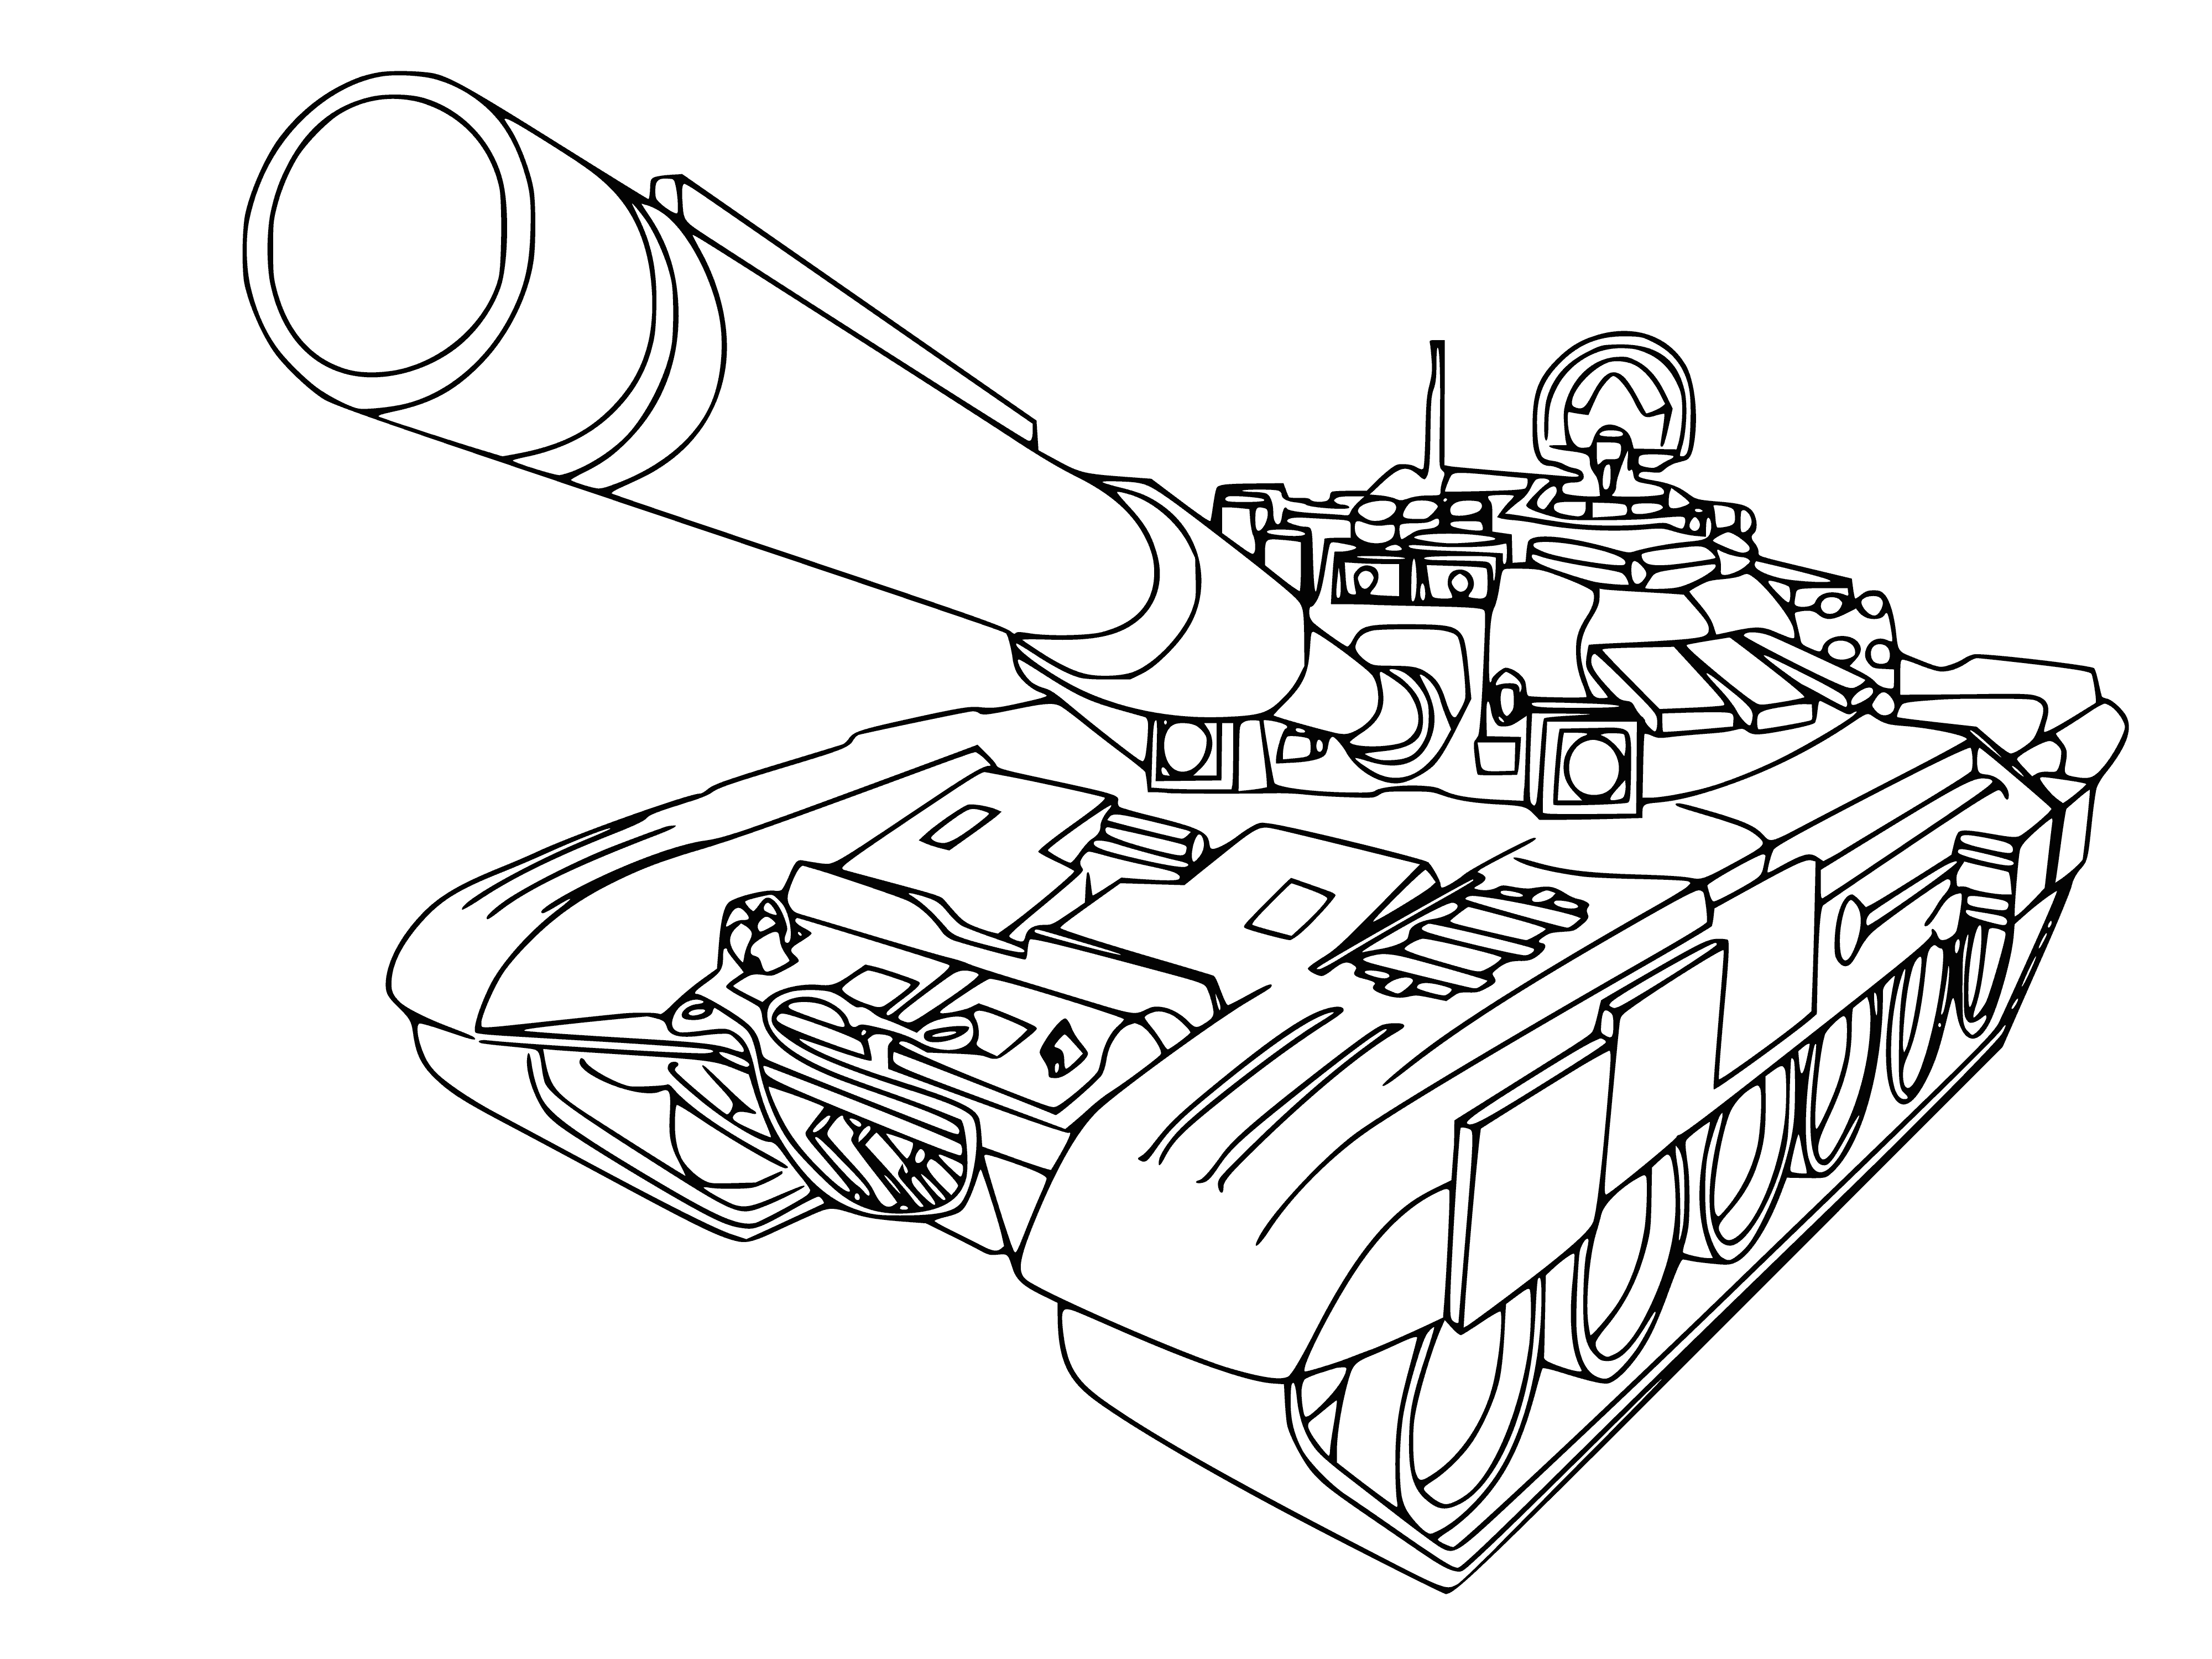 coloring page: Tanks, soldiers & mountains in desert-like setting, ready to fight. Most tanks green, some of different colors. Daytime. #coloringpage